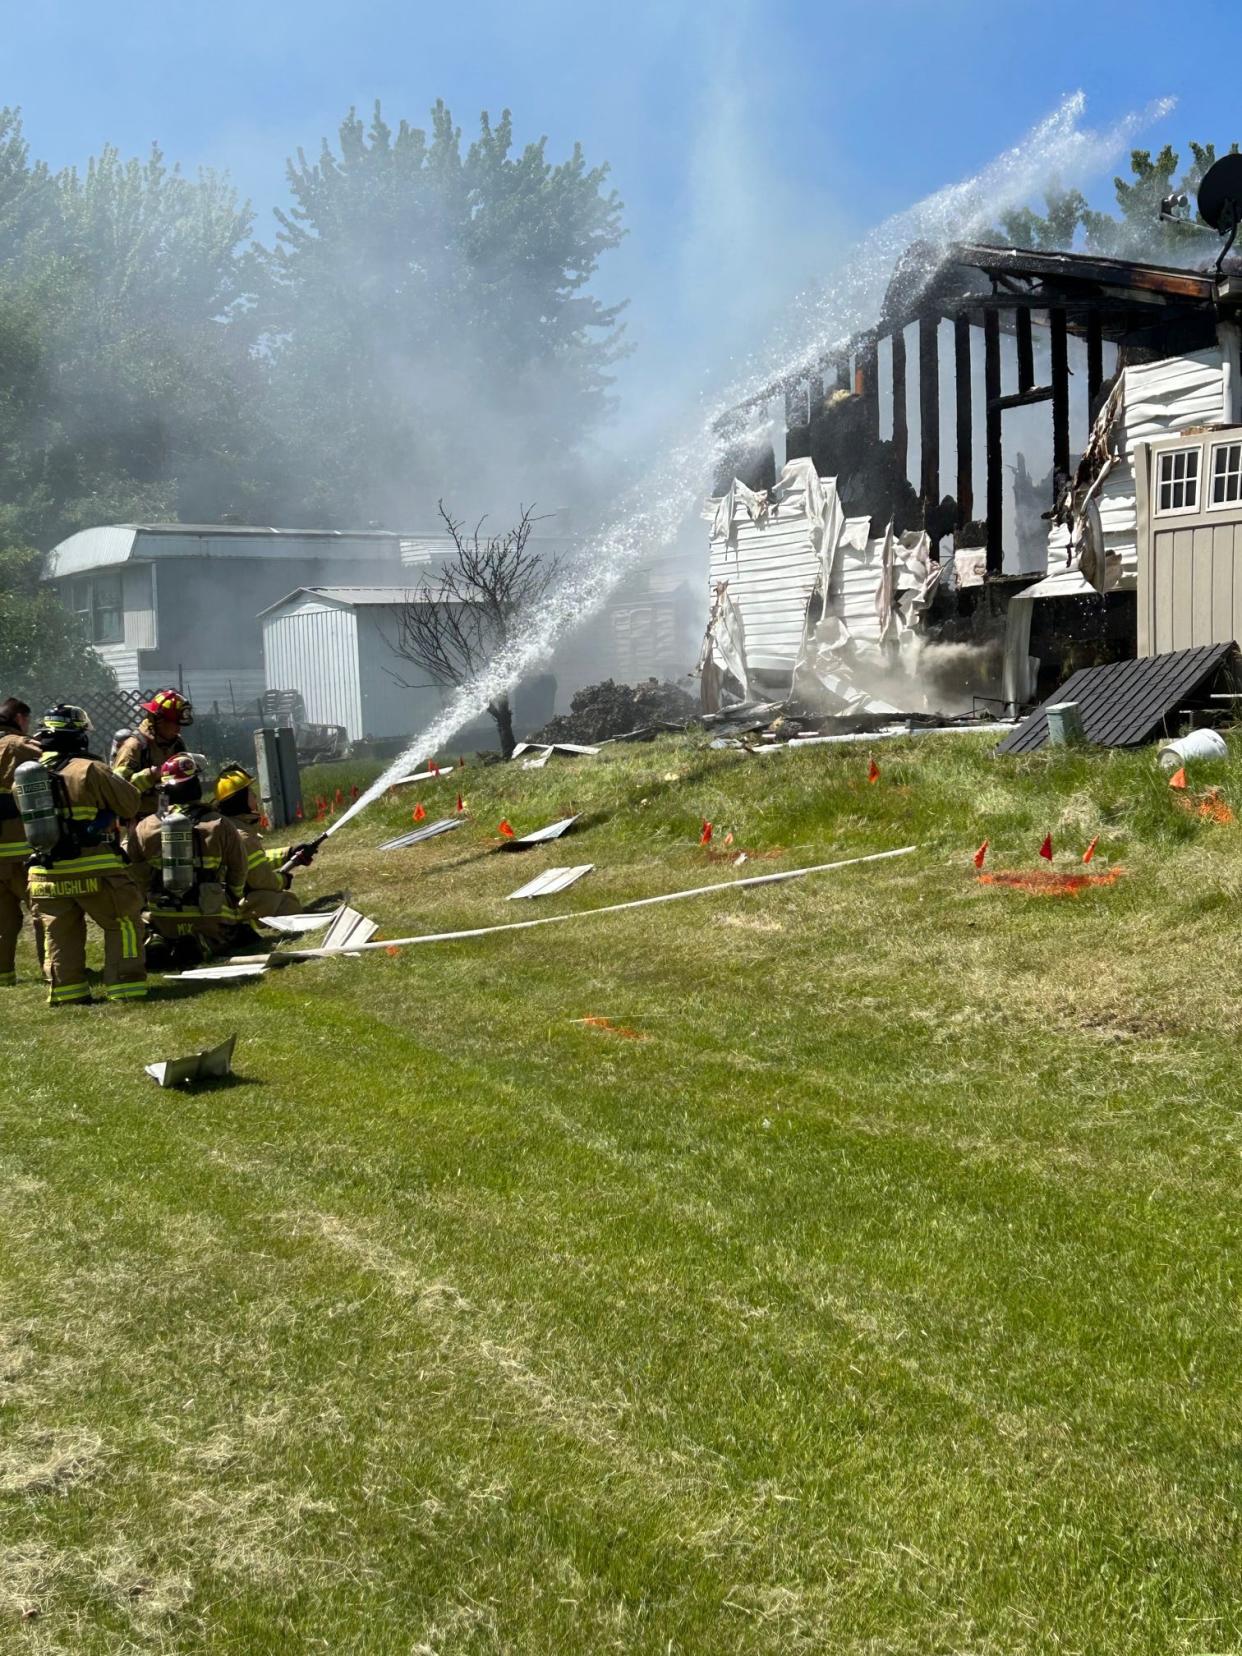 Firefighters battled a ferocious fire Friday, May 26, 2023, that had broken out in a Chesterfield home in the Carriage Way Trailer Park. A ruptured gas line caused an explosion, which then started the blaze.